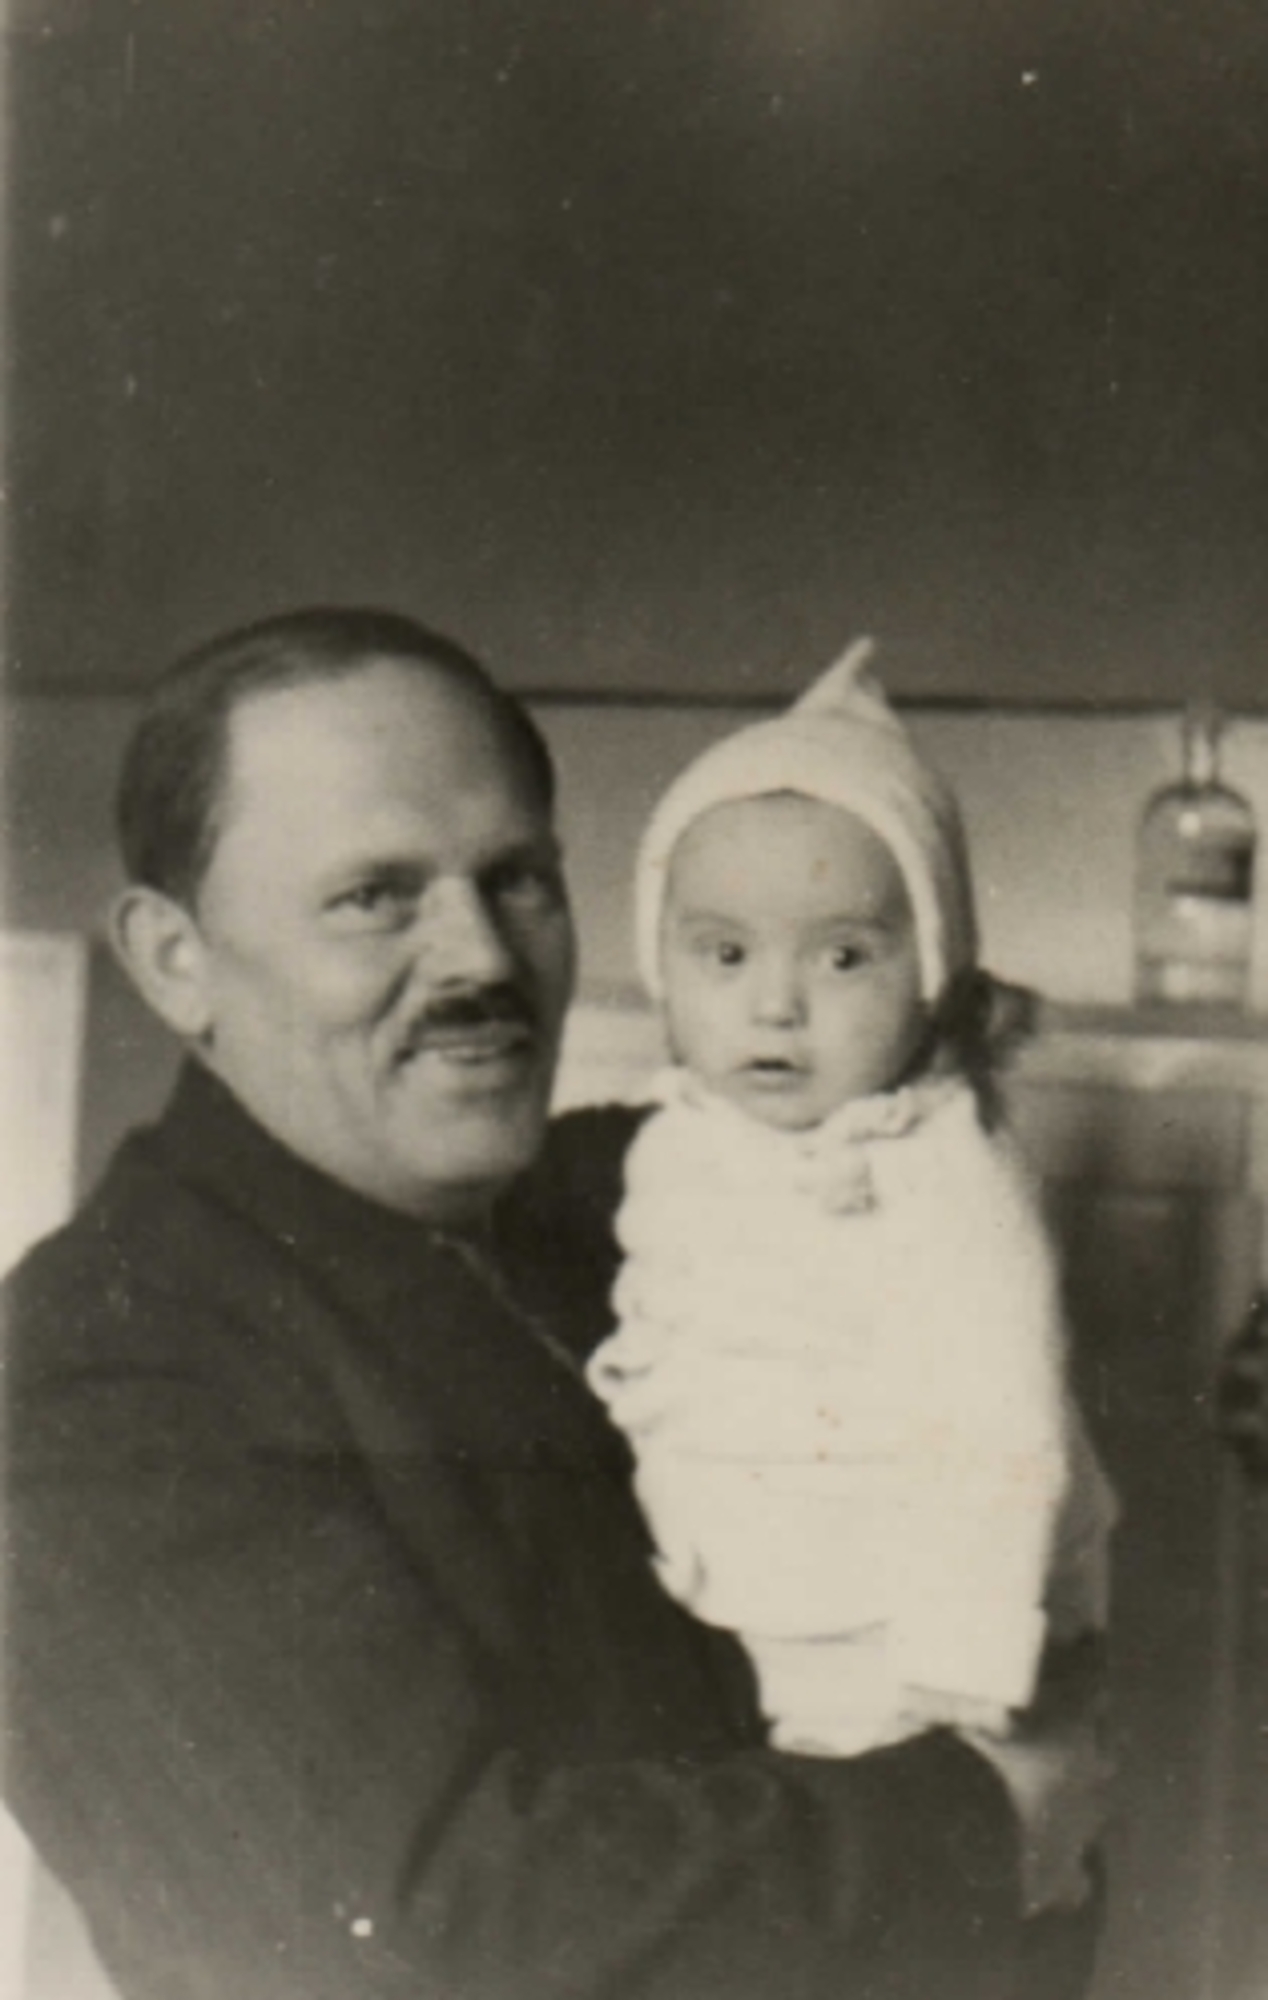 With grandfather Tůma on January 10, 1943